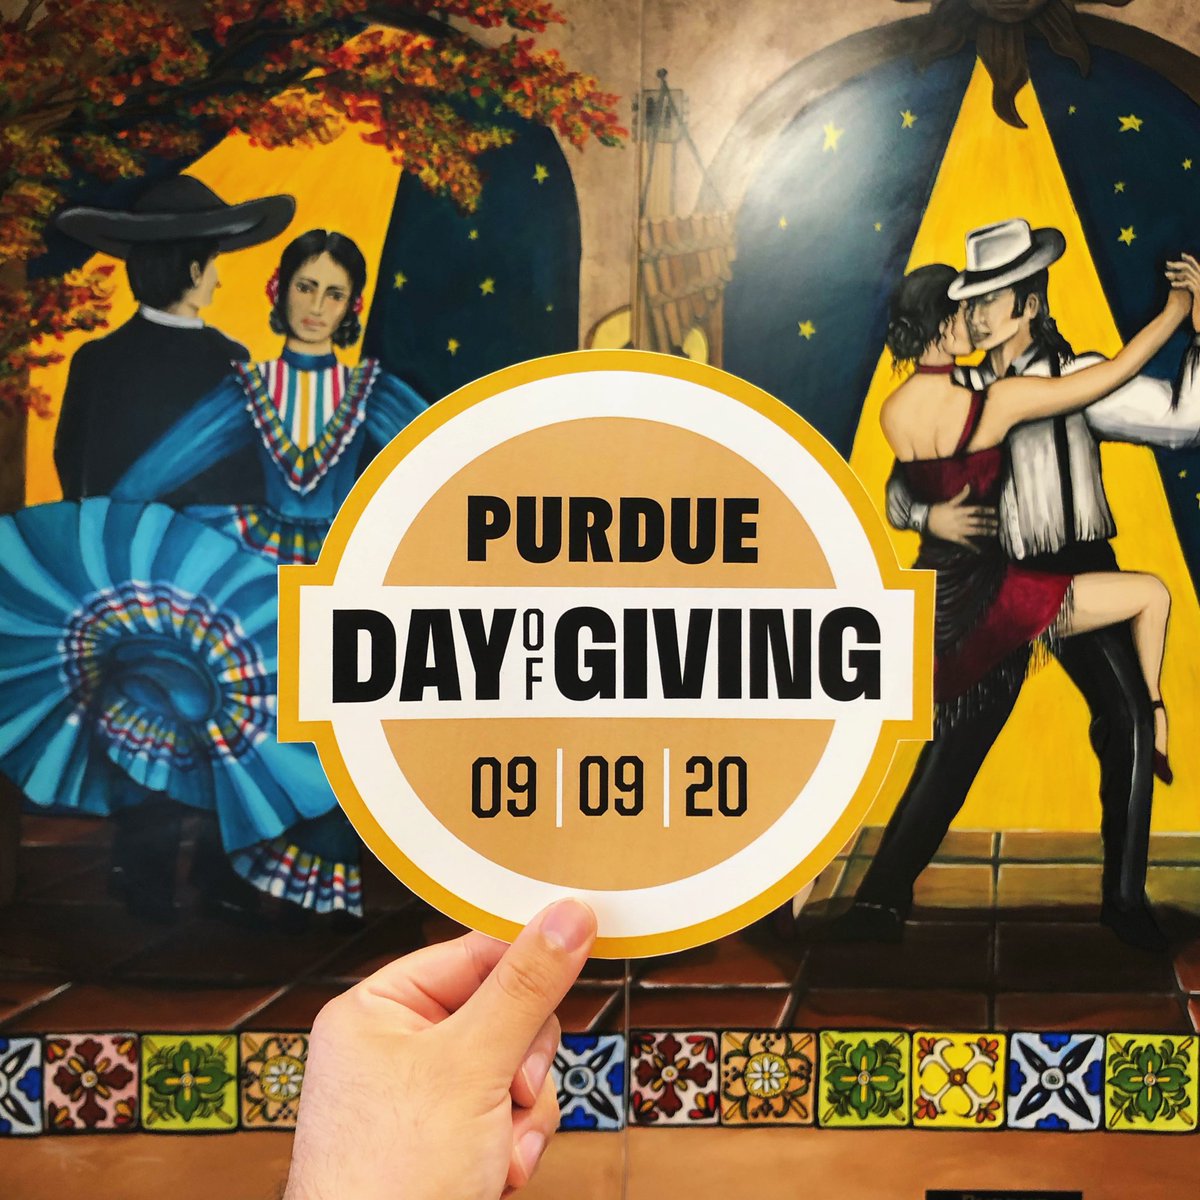 Eileen Garcia, Class of 2004, helped the @LCCPurdue #MeetTheChallenge when she created the Latin Dance, Music, Art & Rhythm! Mural. Dance your way to make a gift at tinyurl.com/PDOGLCC!

#PurdueDayOfGiving #PurdueLCC #SomosPurdue #MeetTheChallenge #RepresentationMatters